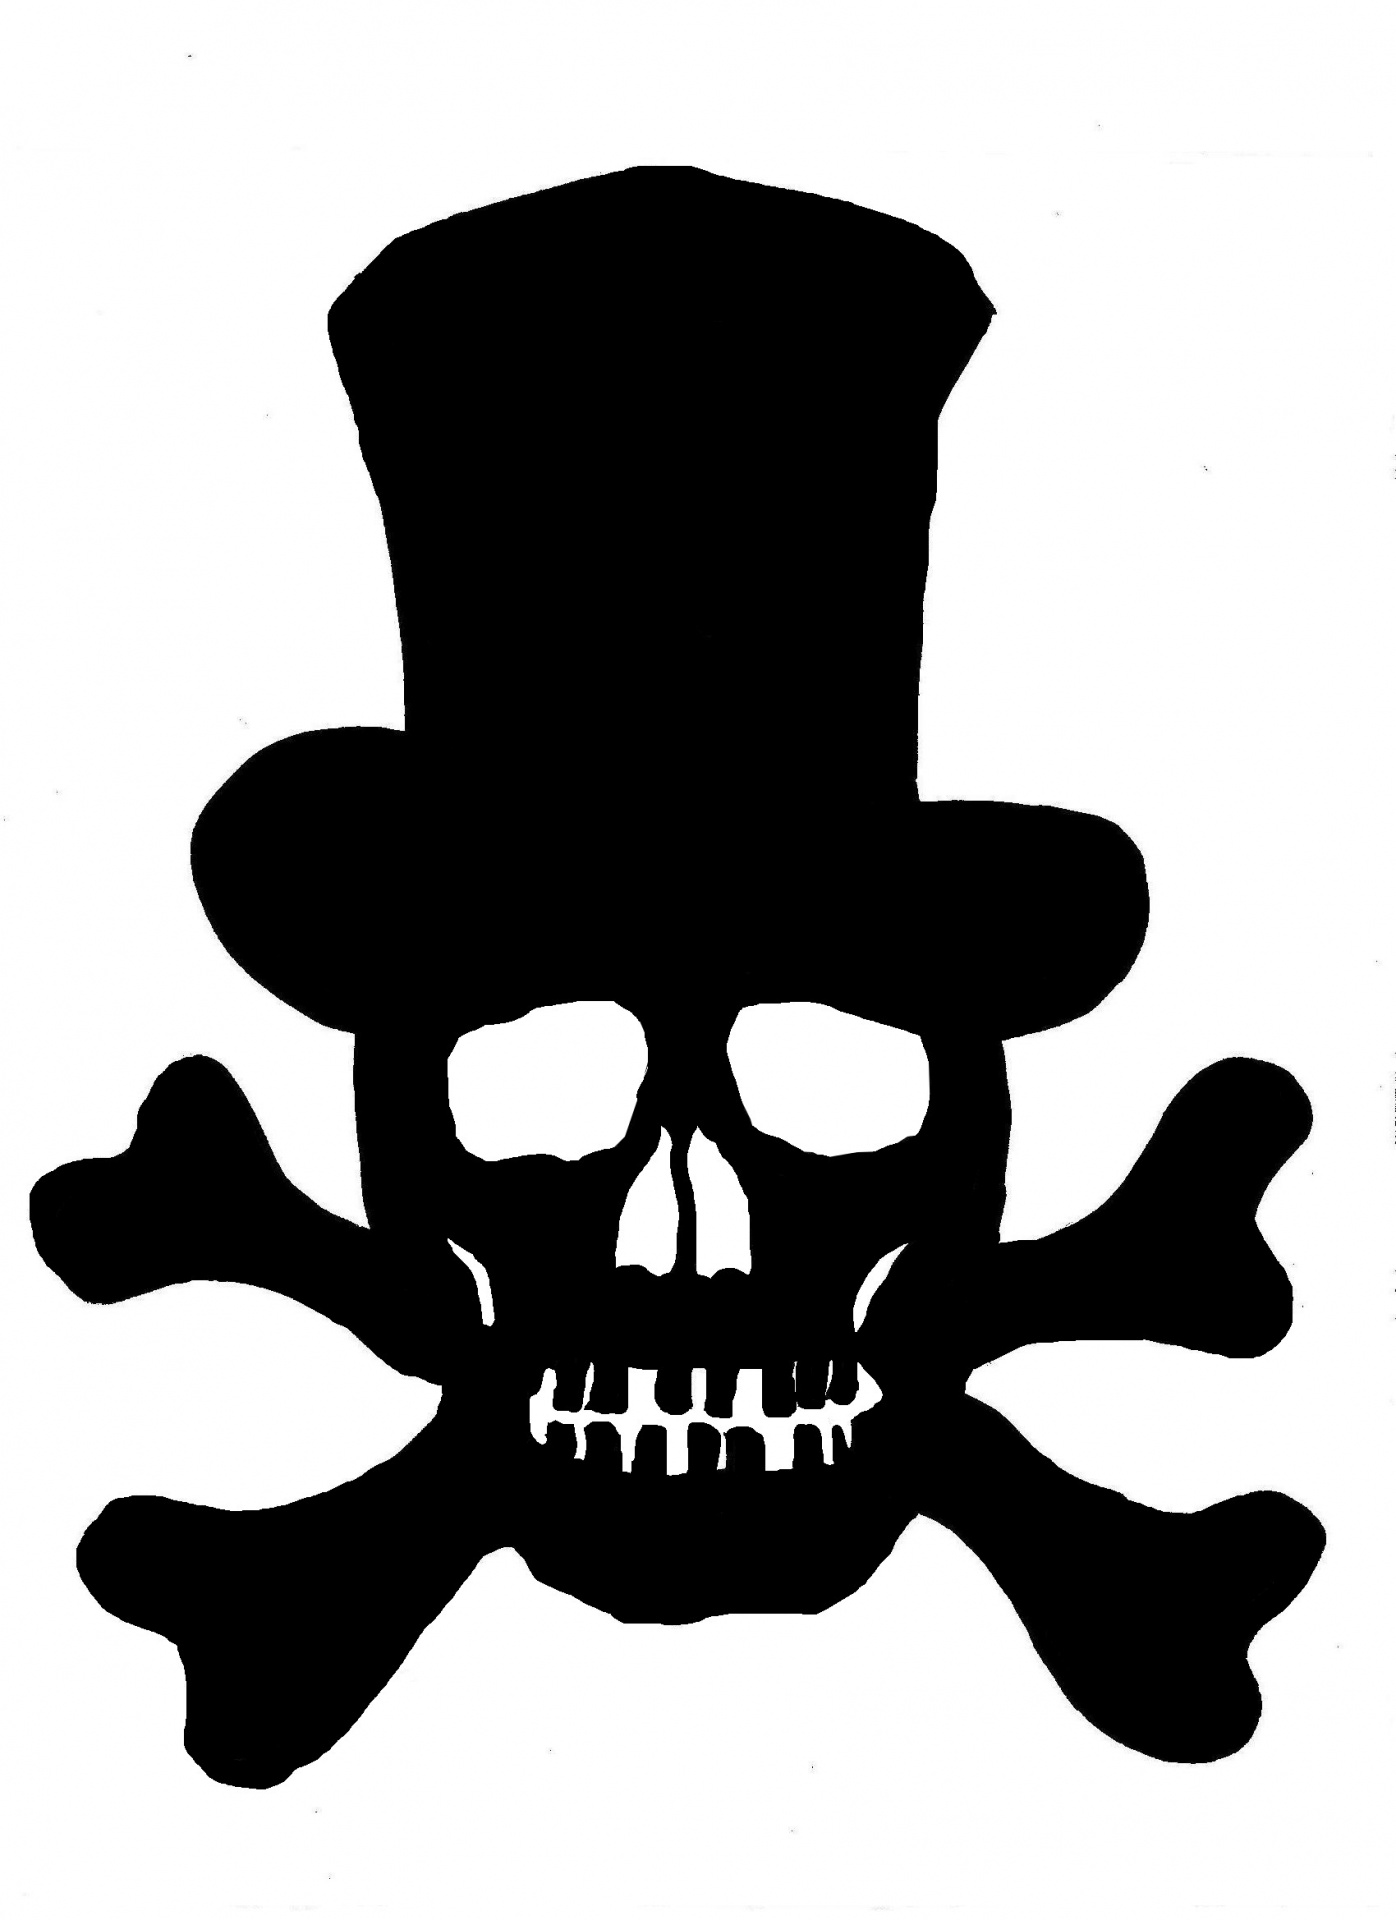 Skull Free Stock Photo - Public Domain Pictures